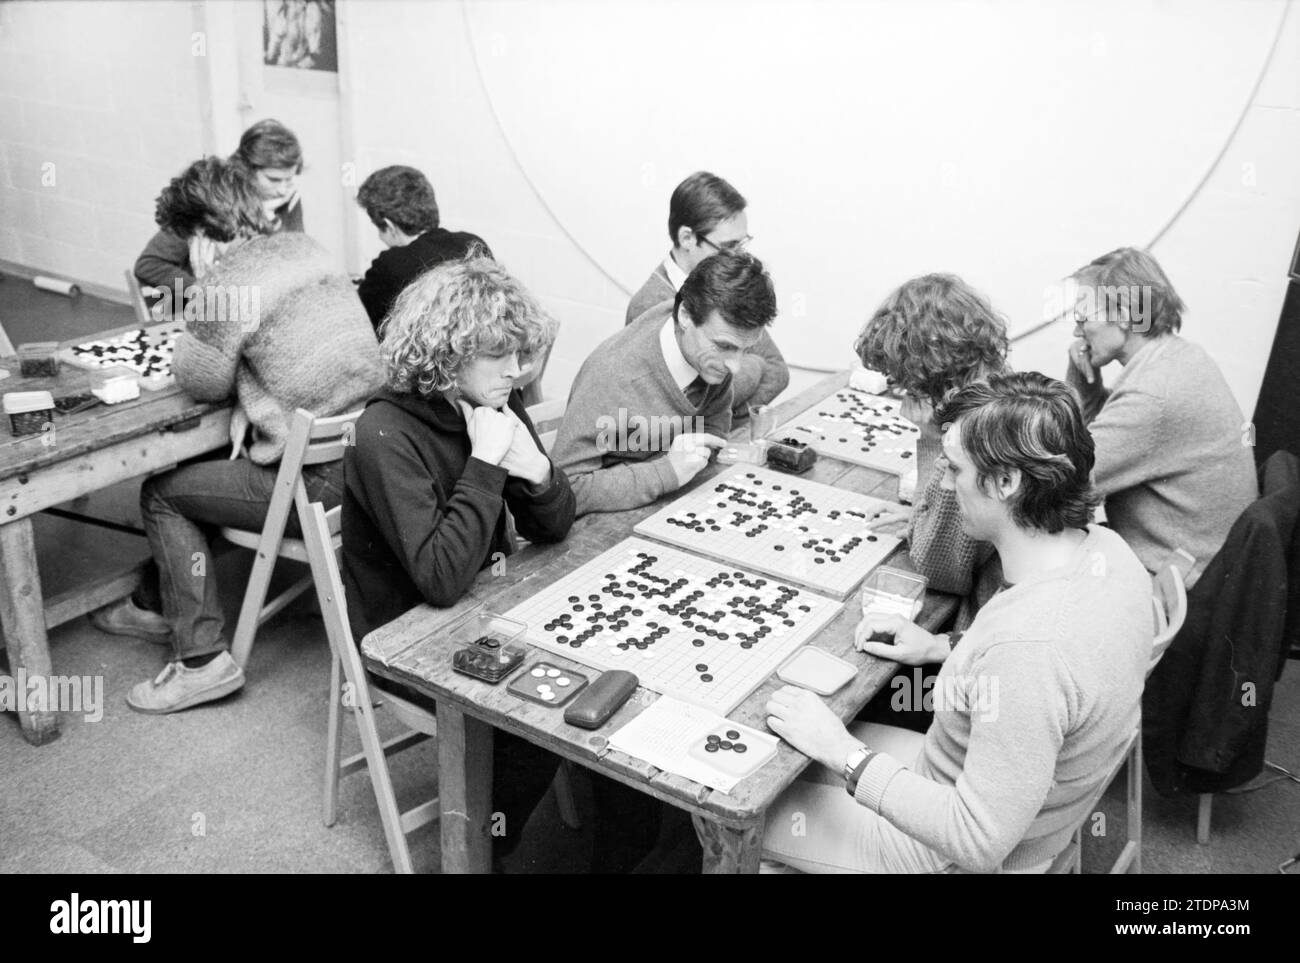 Small tournament Go (Japanese board game), 03-11-1980, Whizgle News from the Past, Tailored for the Future. Explore historical narratives, Dutch The Netherlands agency image with a modern perspective, bridging the gap between yesterday's events and tomorrow's insights. A timeless journey shaping the stories that shape our future Stock Photo